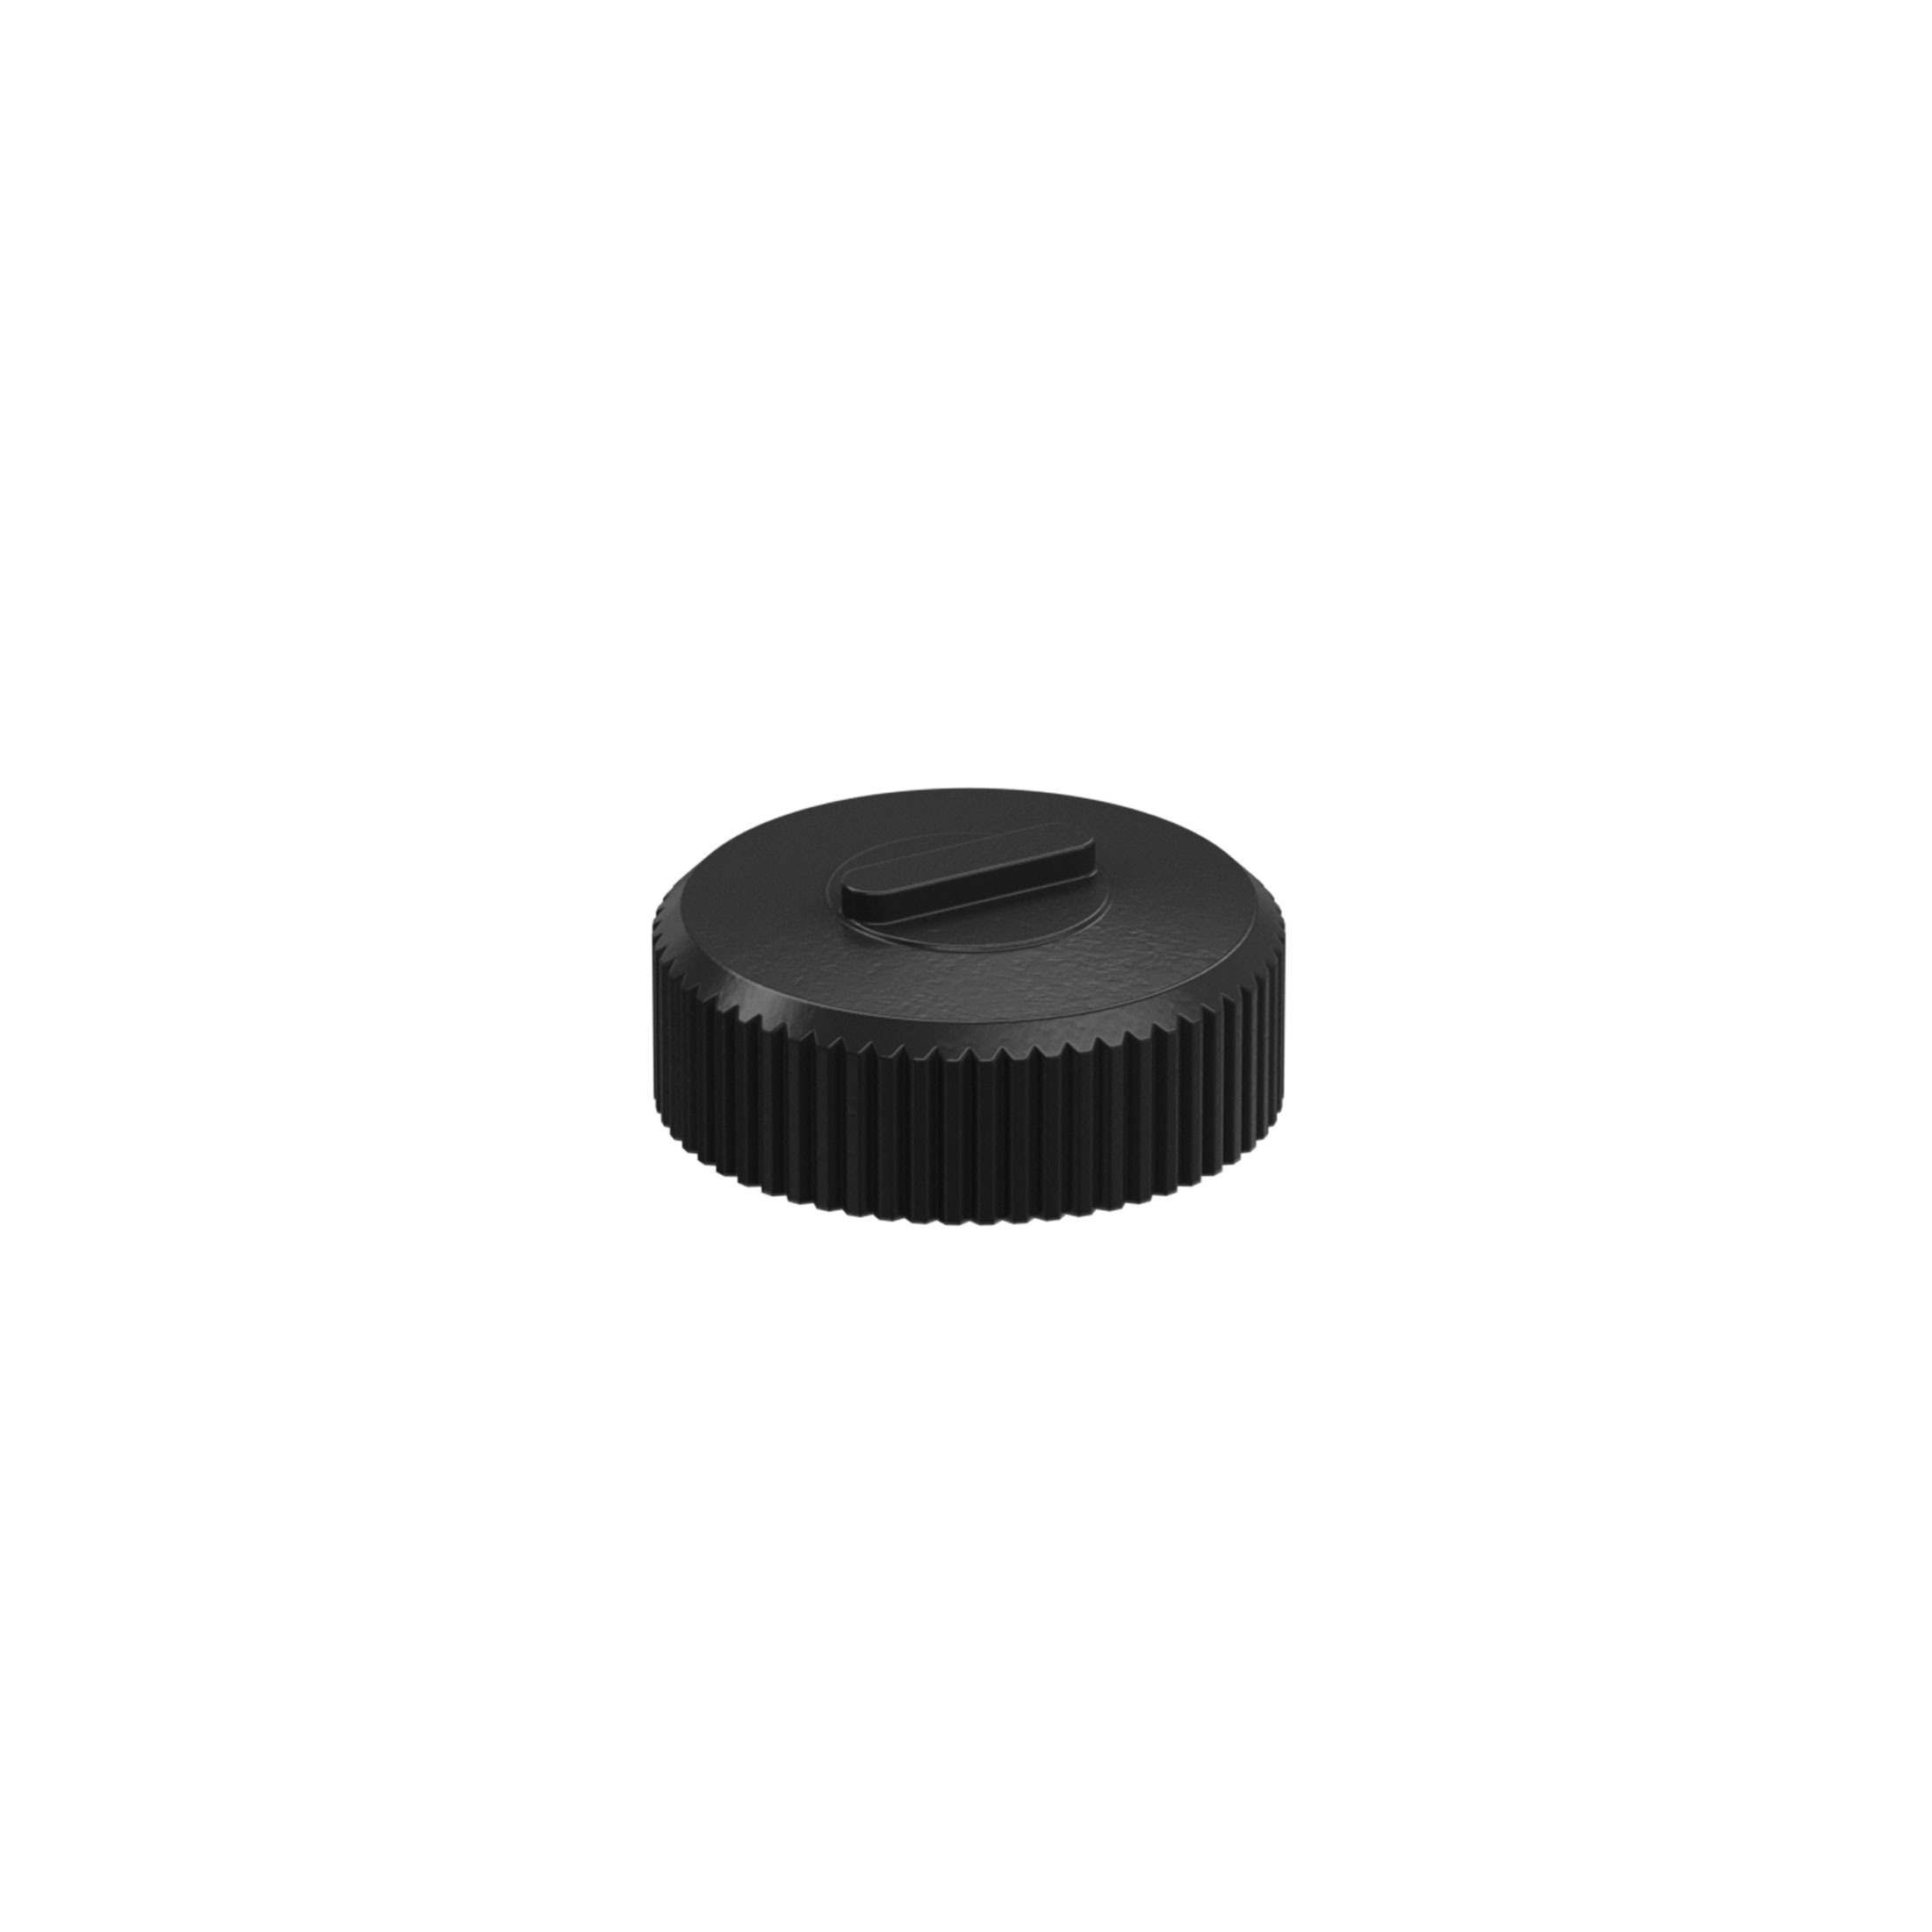 Holosun Turret Cap HS-TURRET-CAP, accessory for Holosun red dot sights